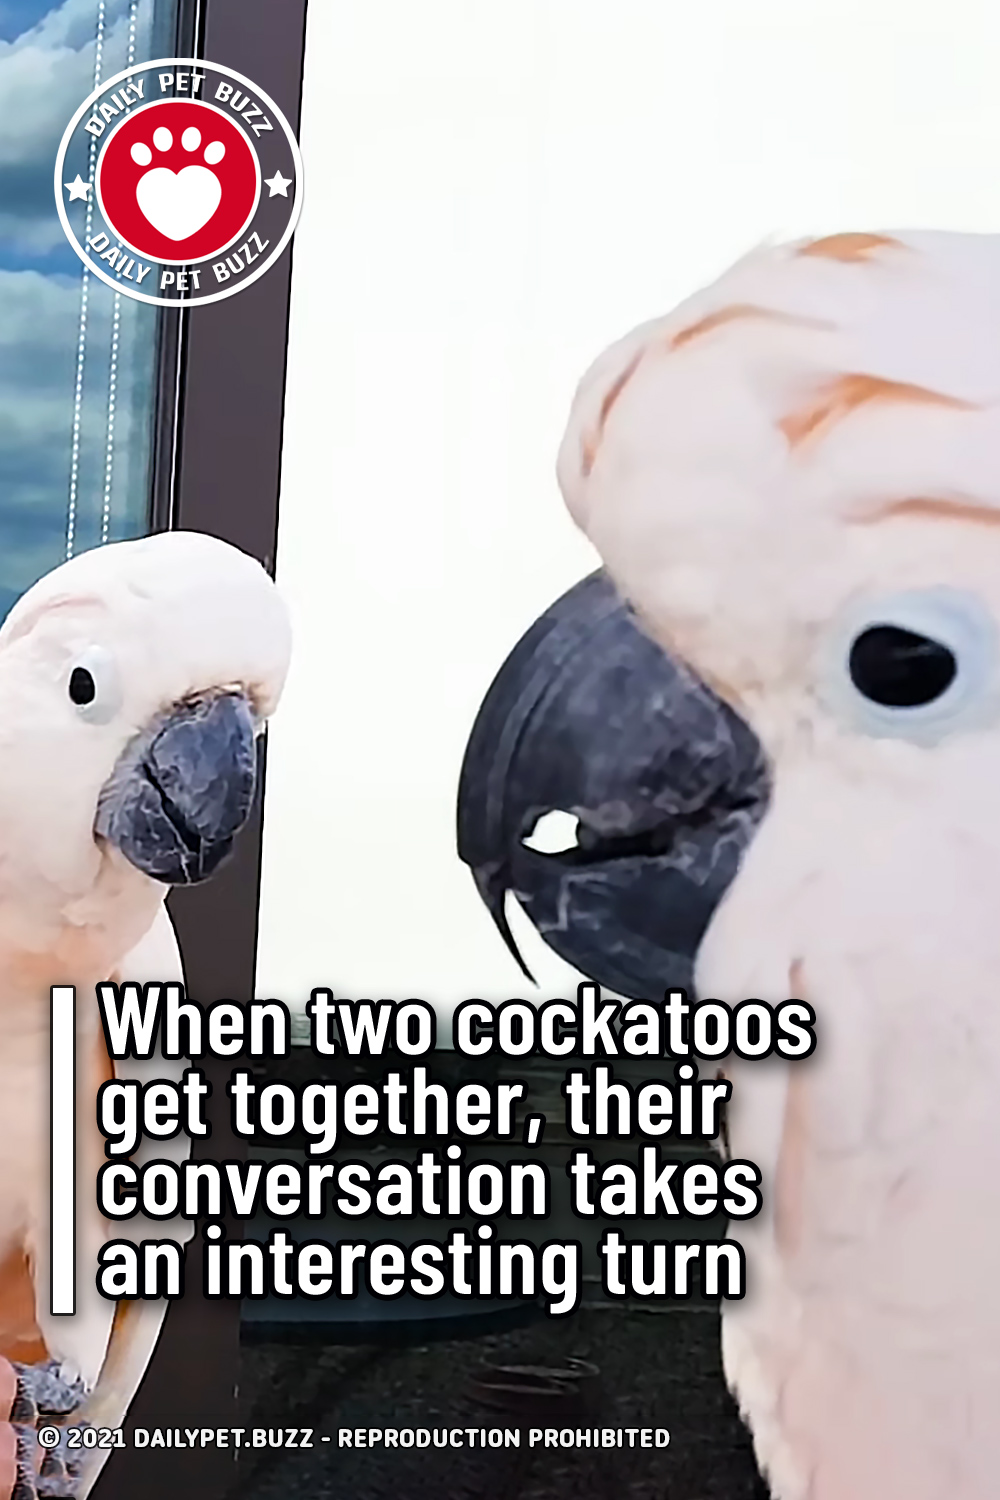 When two cockatoos get together, their conversation takes an interesting turn